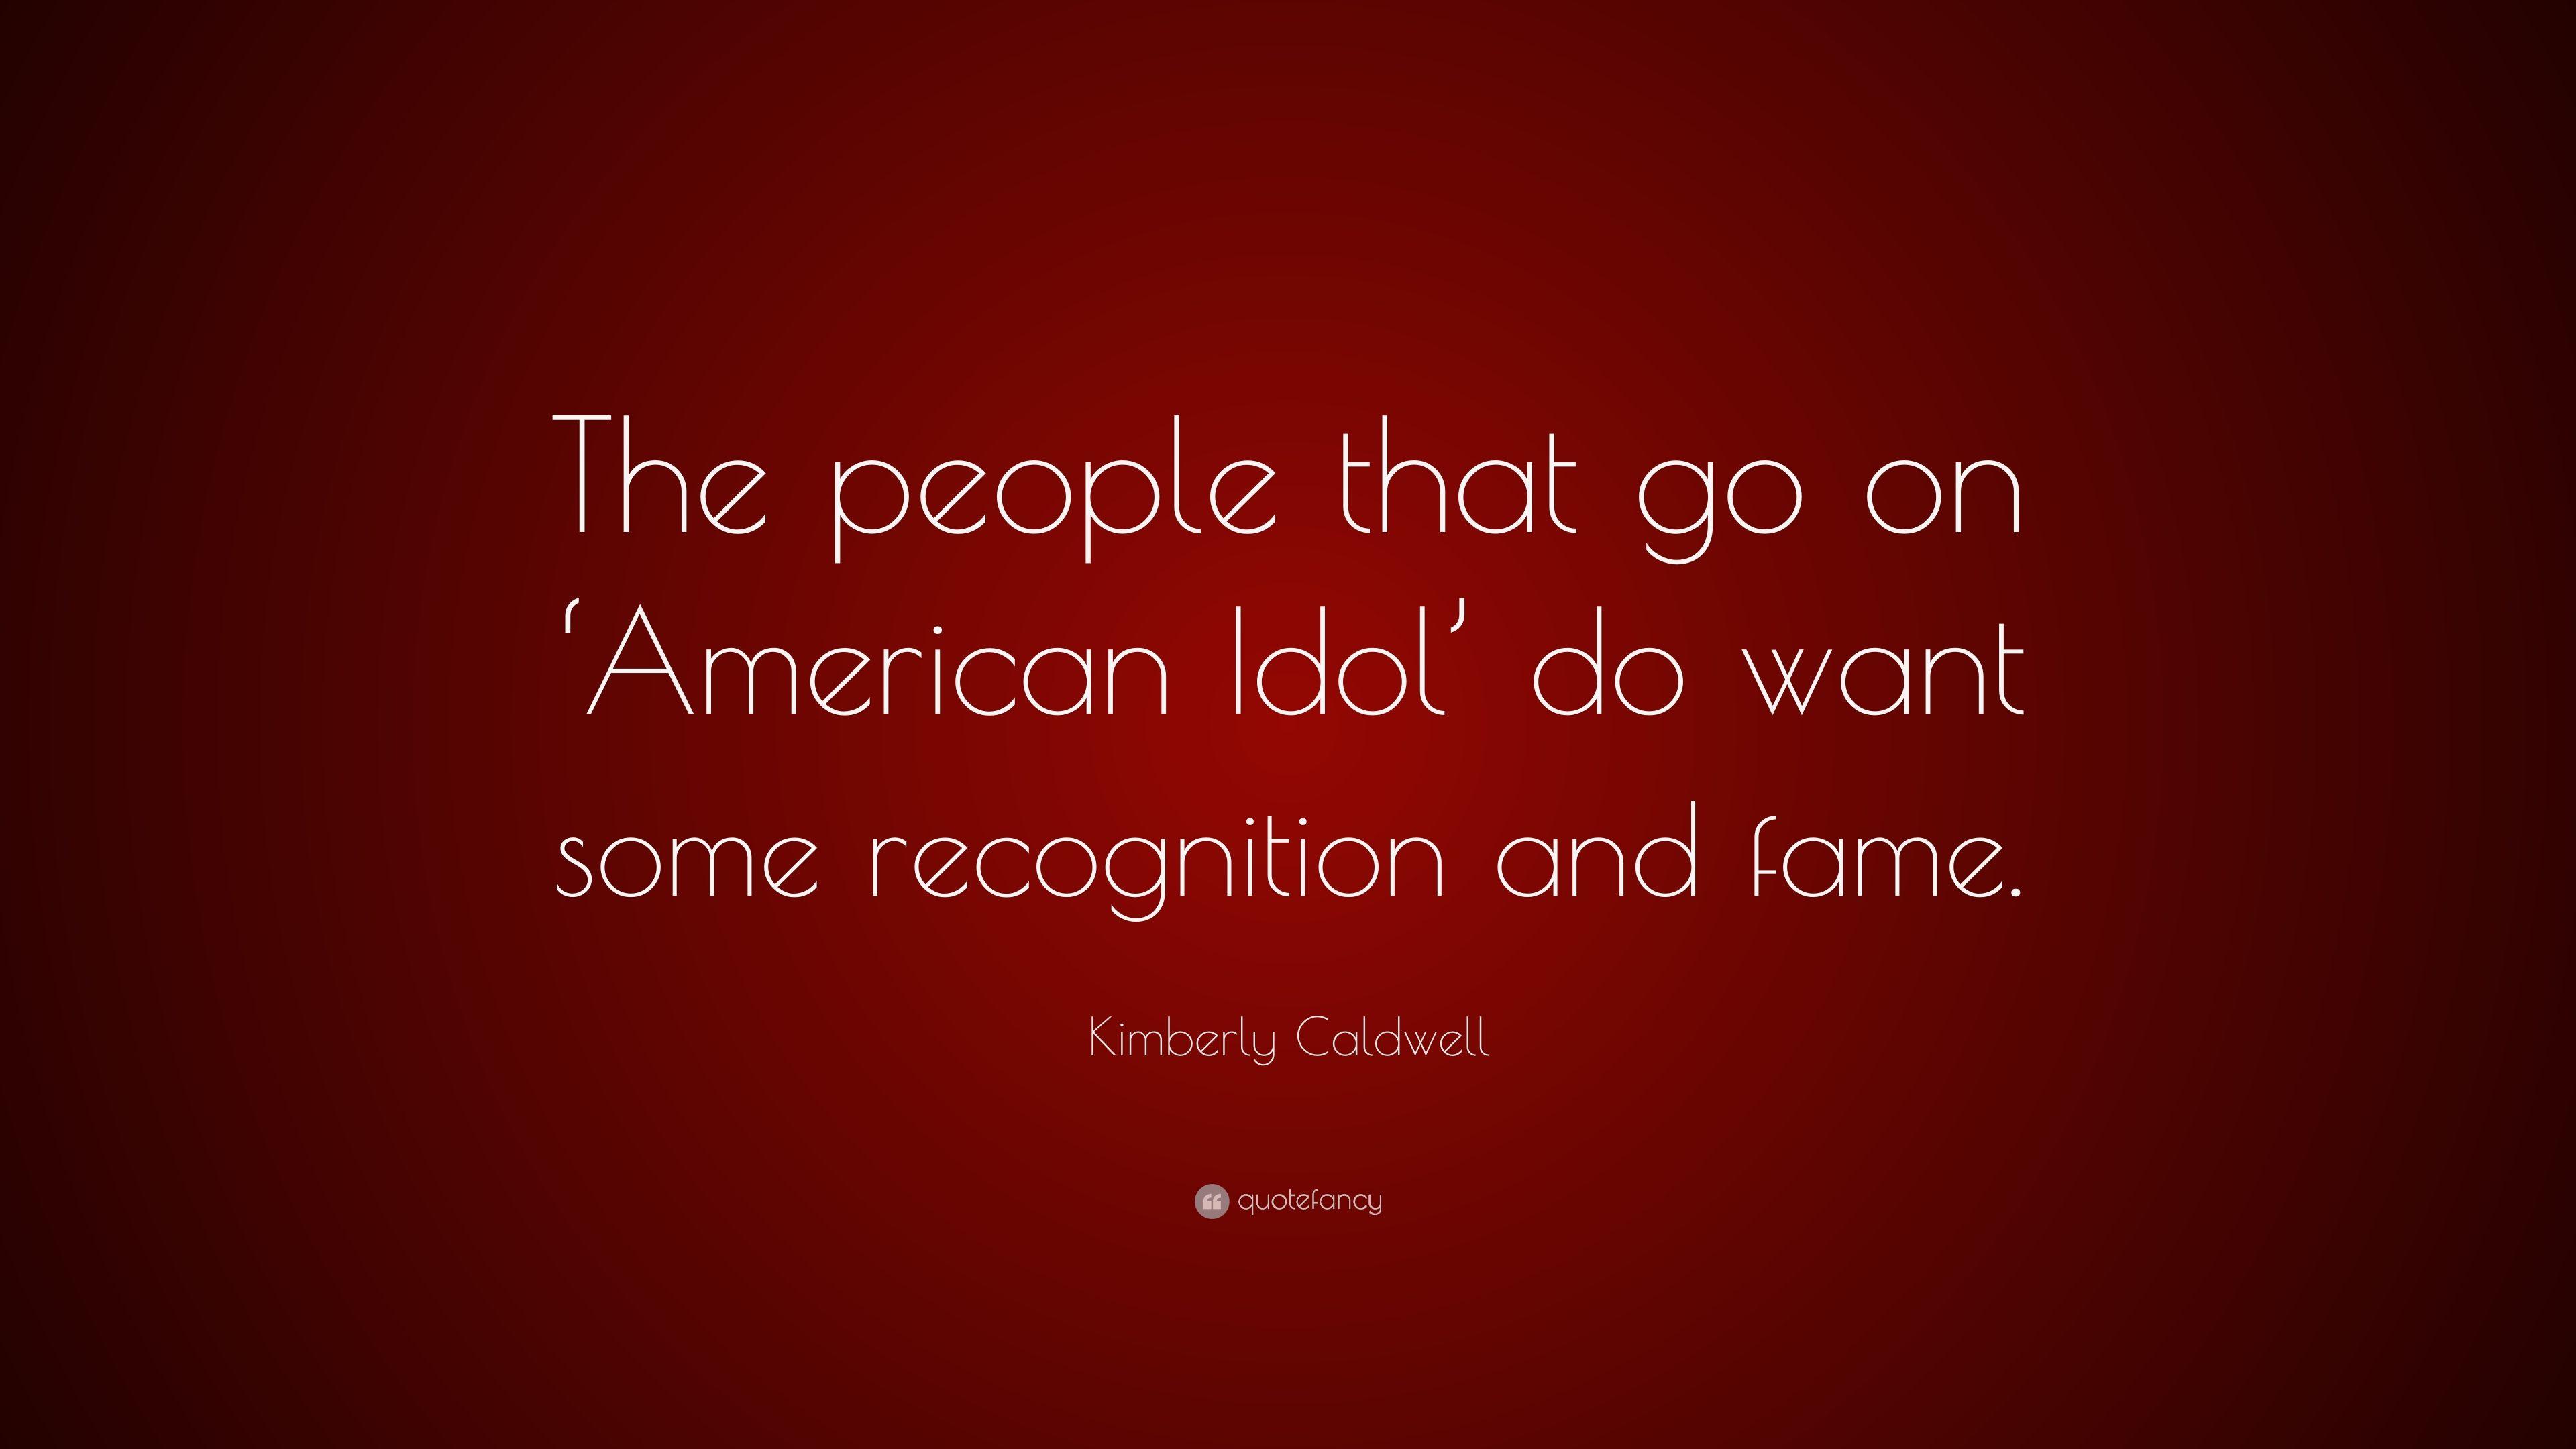 Kimberly Caldwell Quote: “The people that go on 'American Idol' do